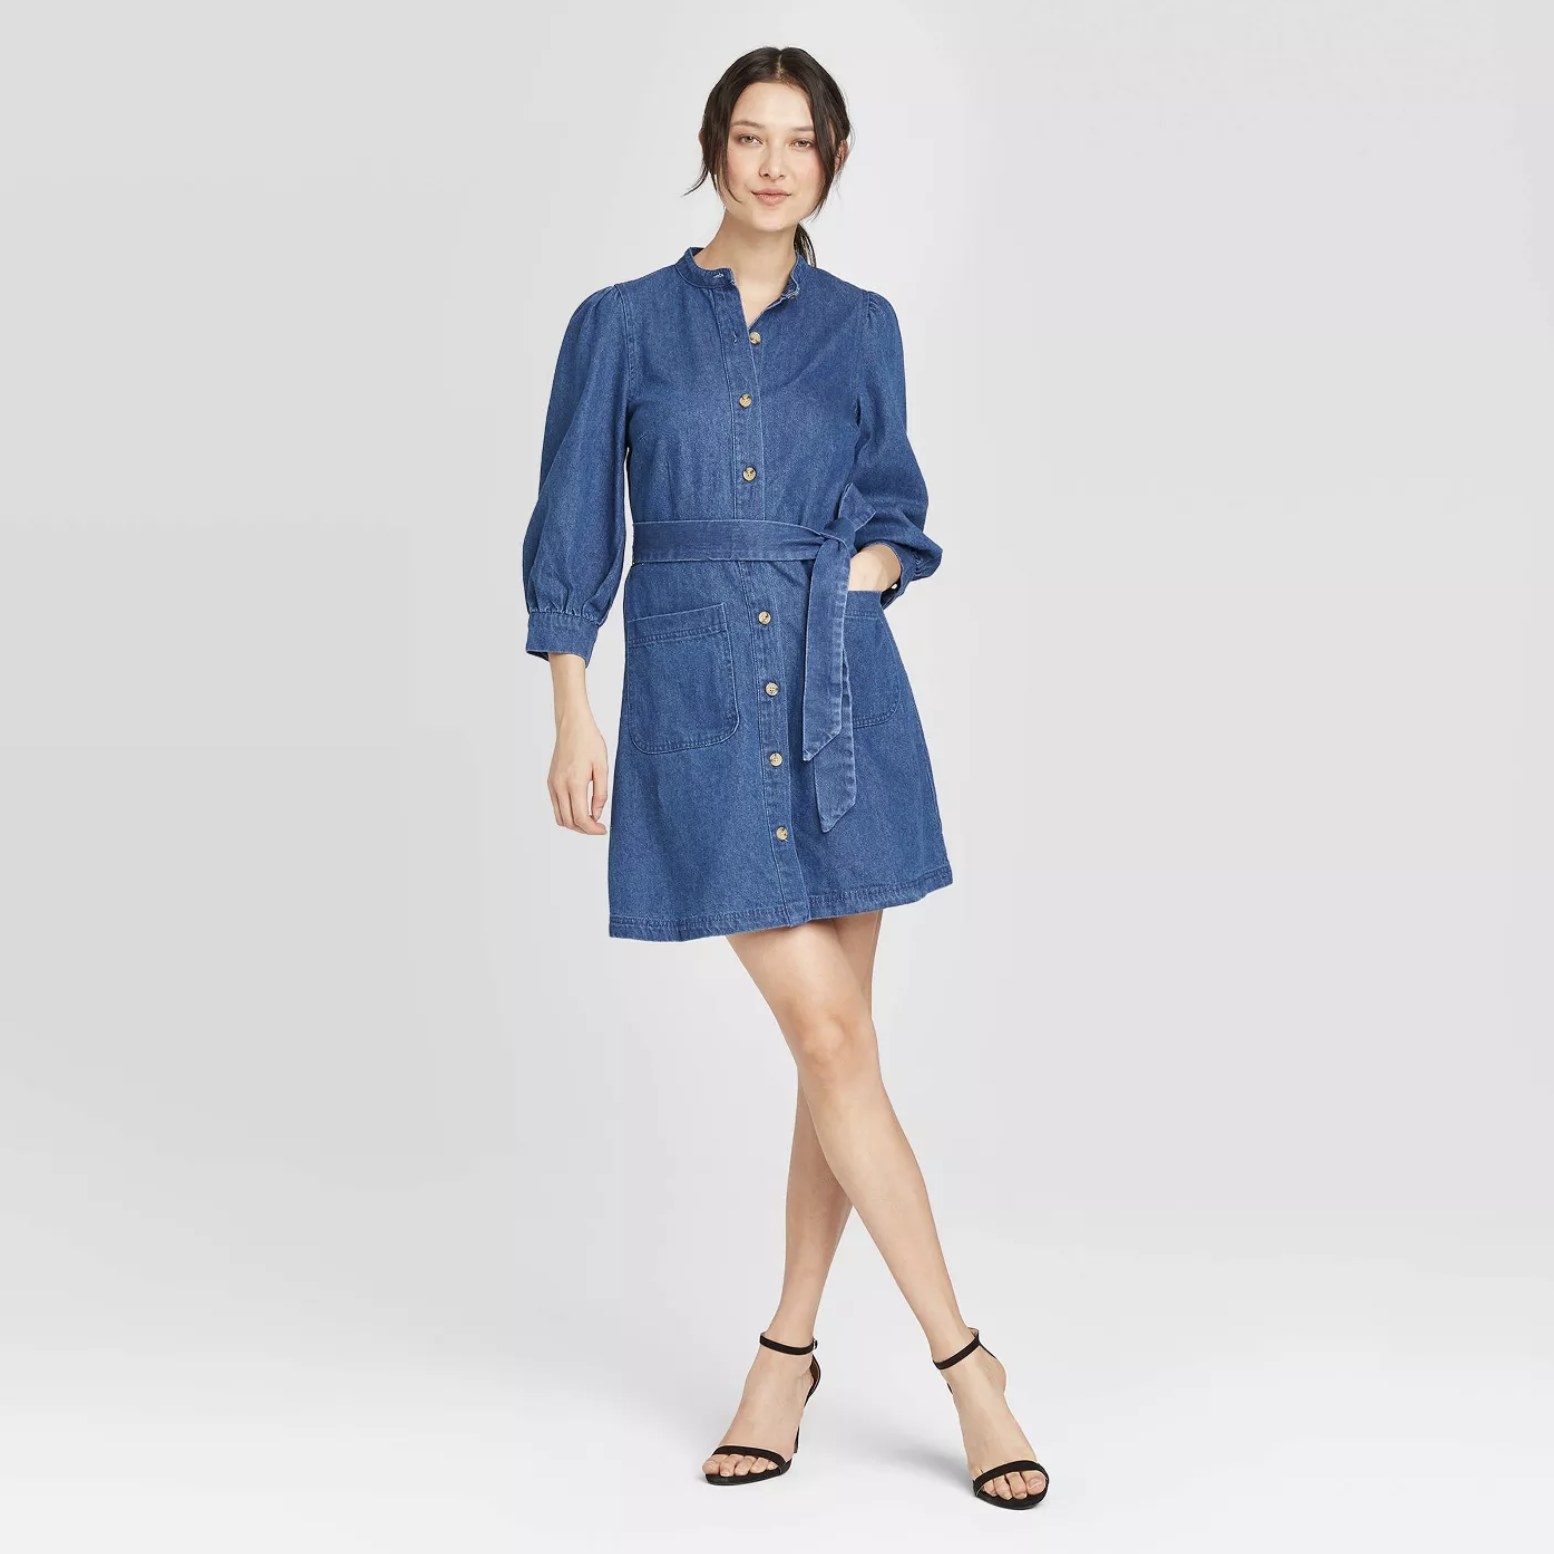 Model is wearing a short three quarter sleeve blue denim dress with buttons down the front and strappy heels